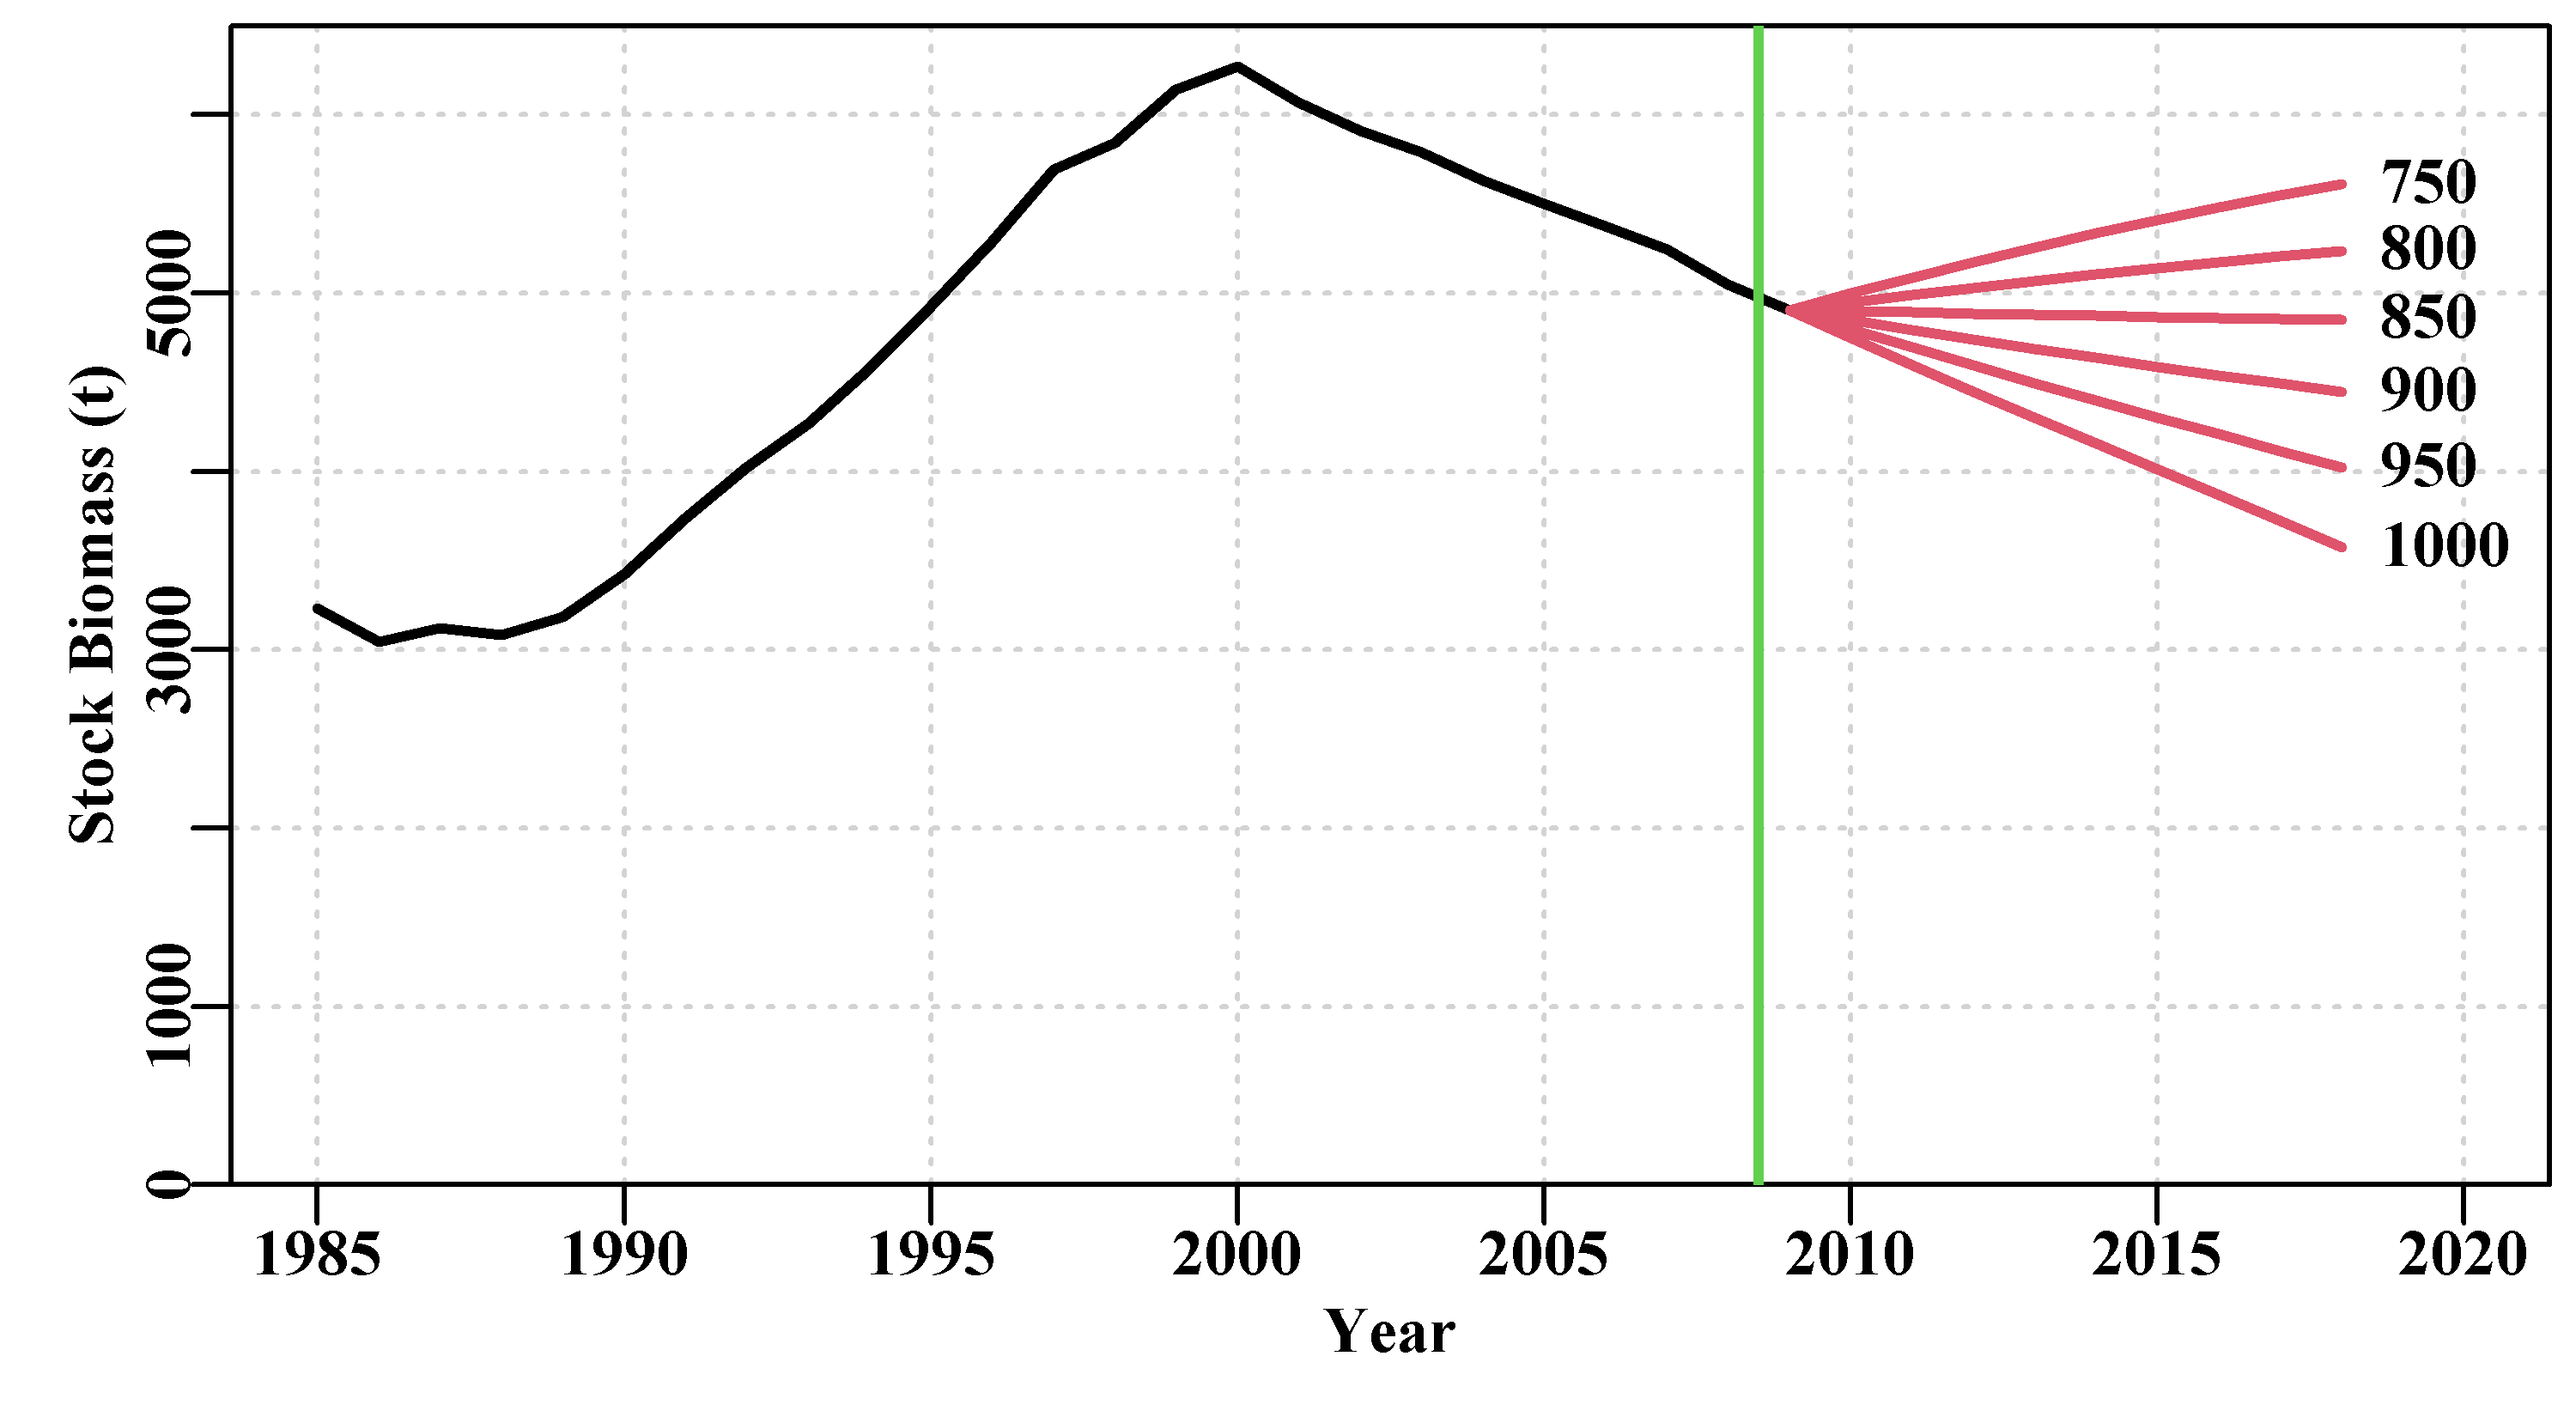 Deterministic constant catch projections of the optimum Fox model fit to the abdat data-set. the vertical green line is the limit of the data available and the red lines to the right of that are the main projections. The numbers are the constant catches imposed.